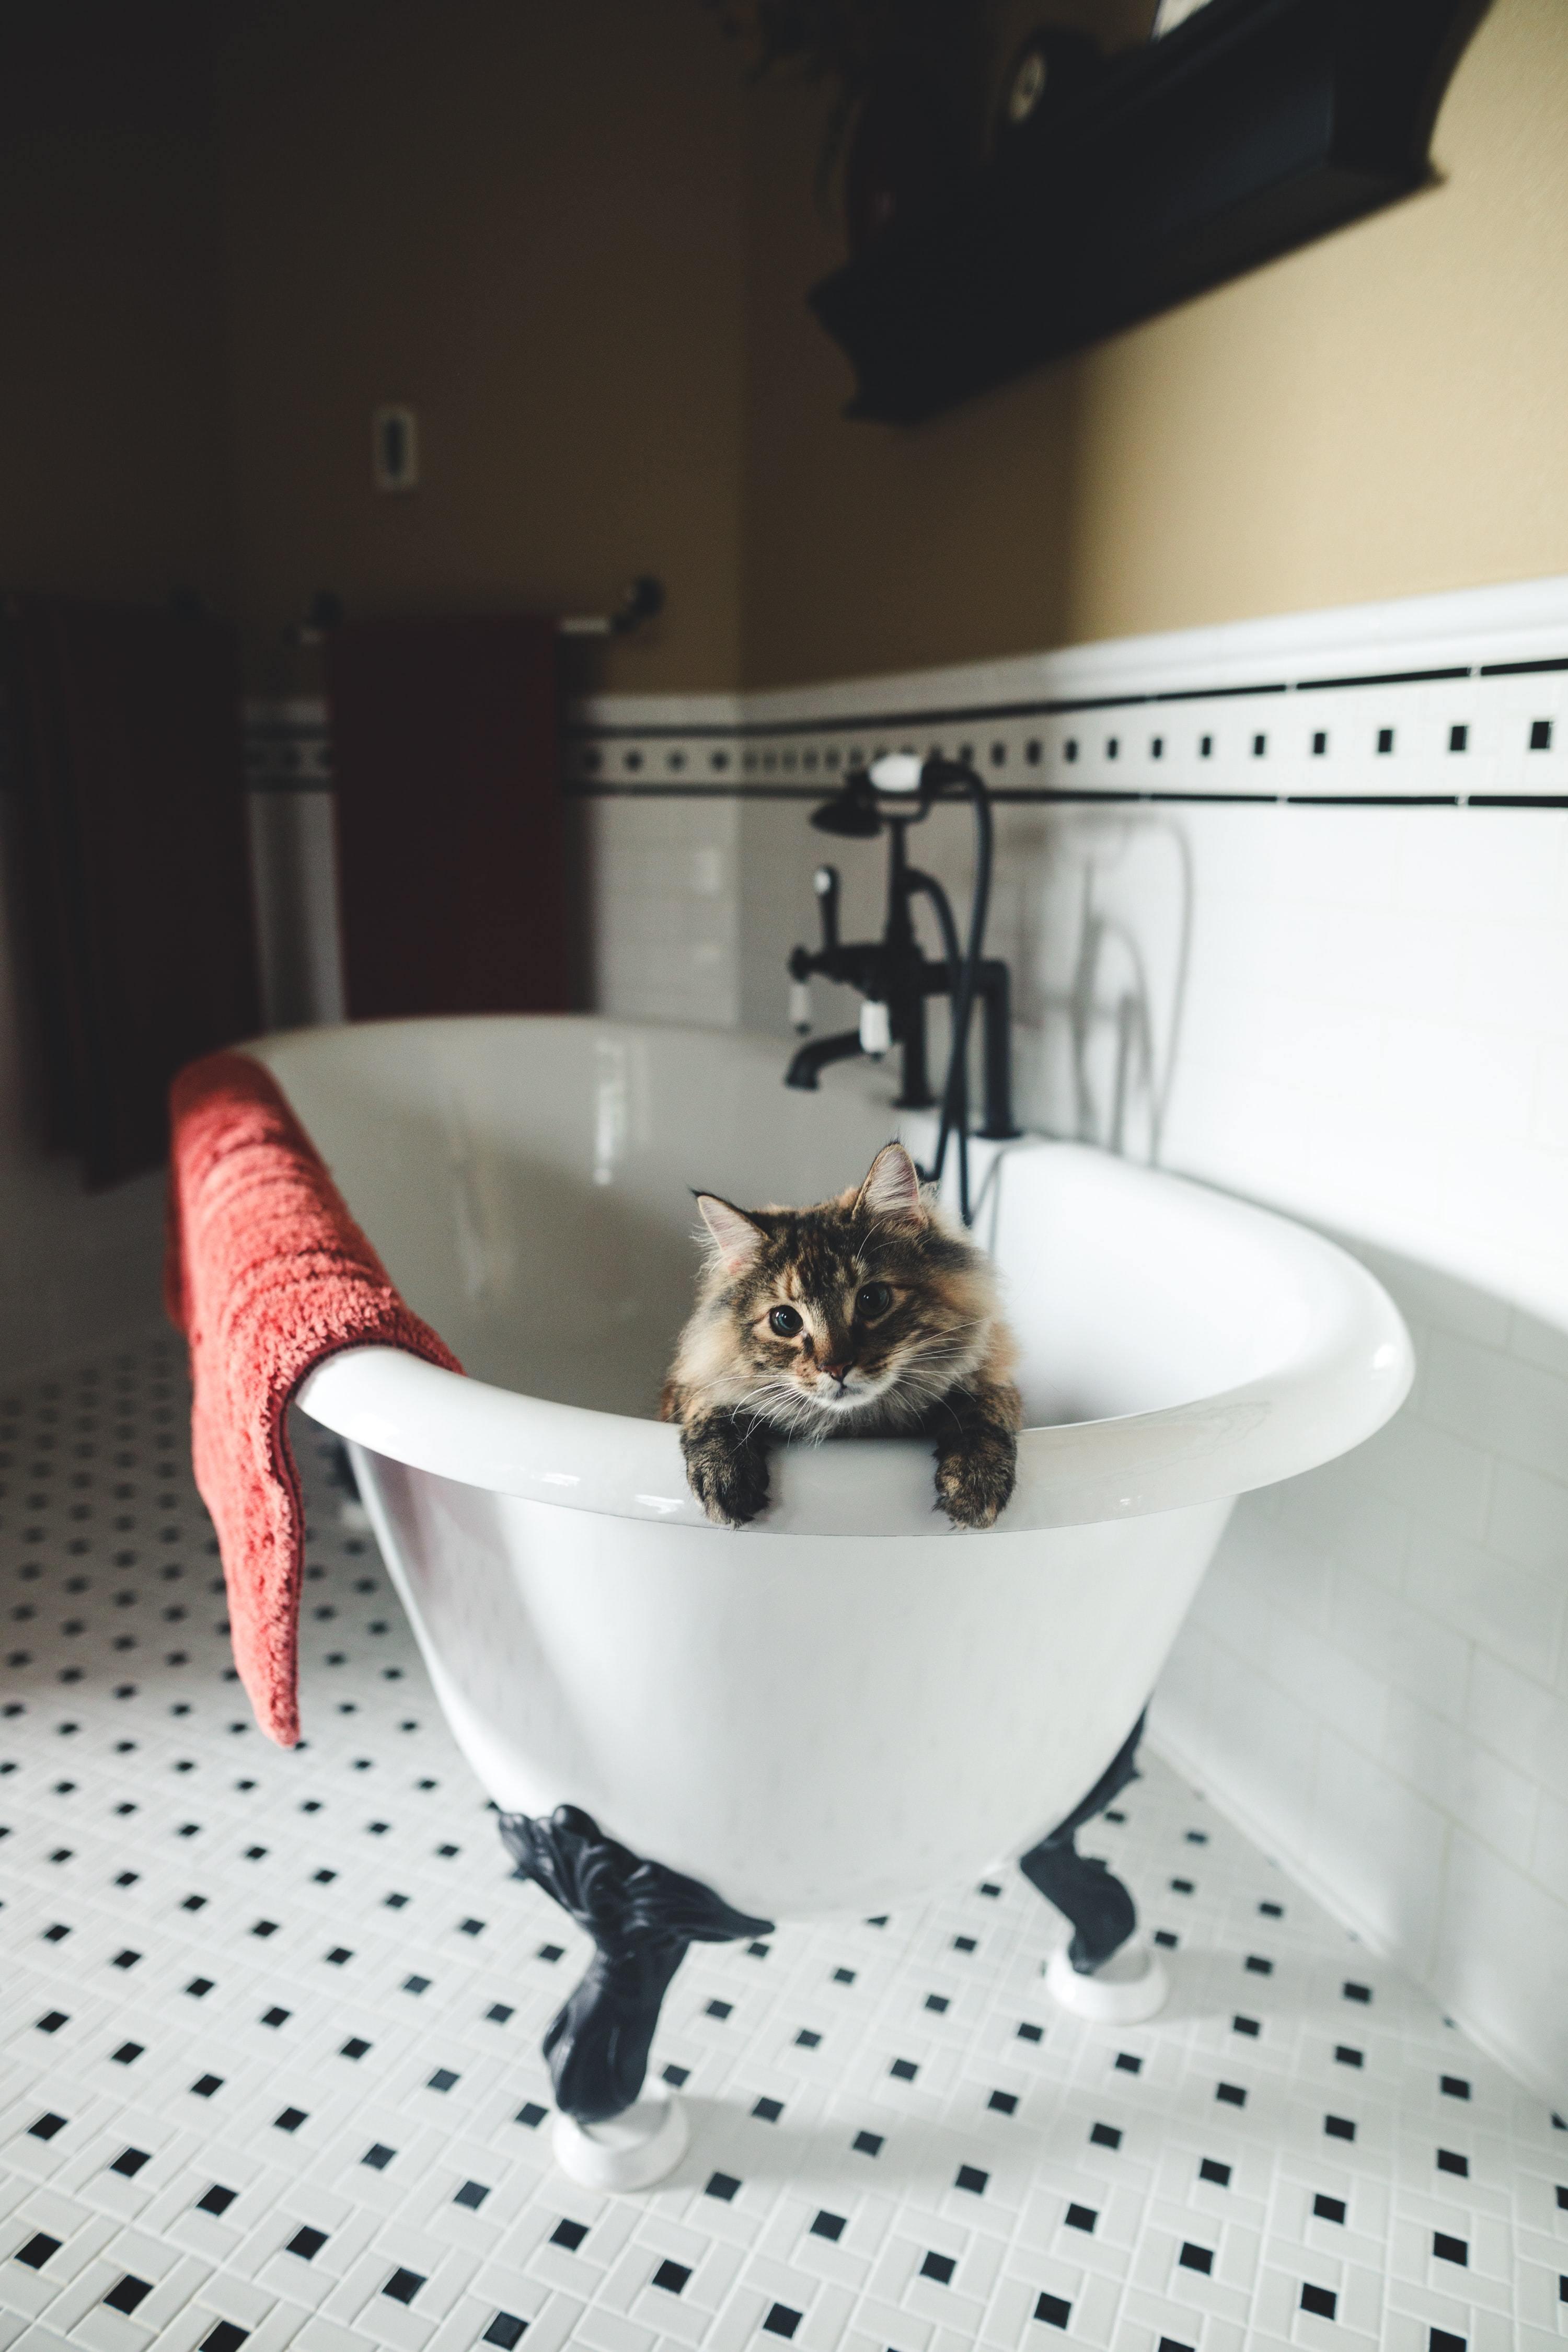 Keep your cat healthy and clean